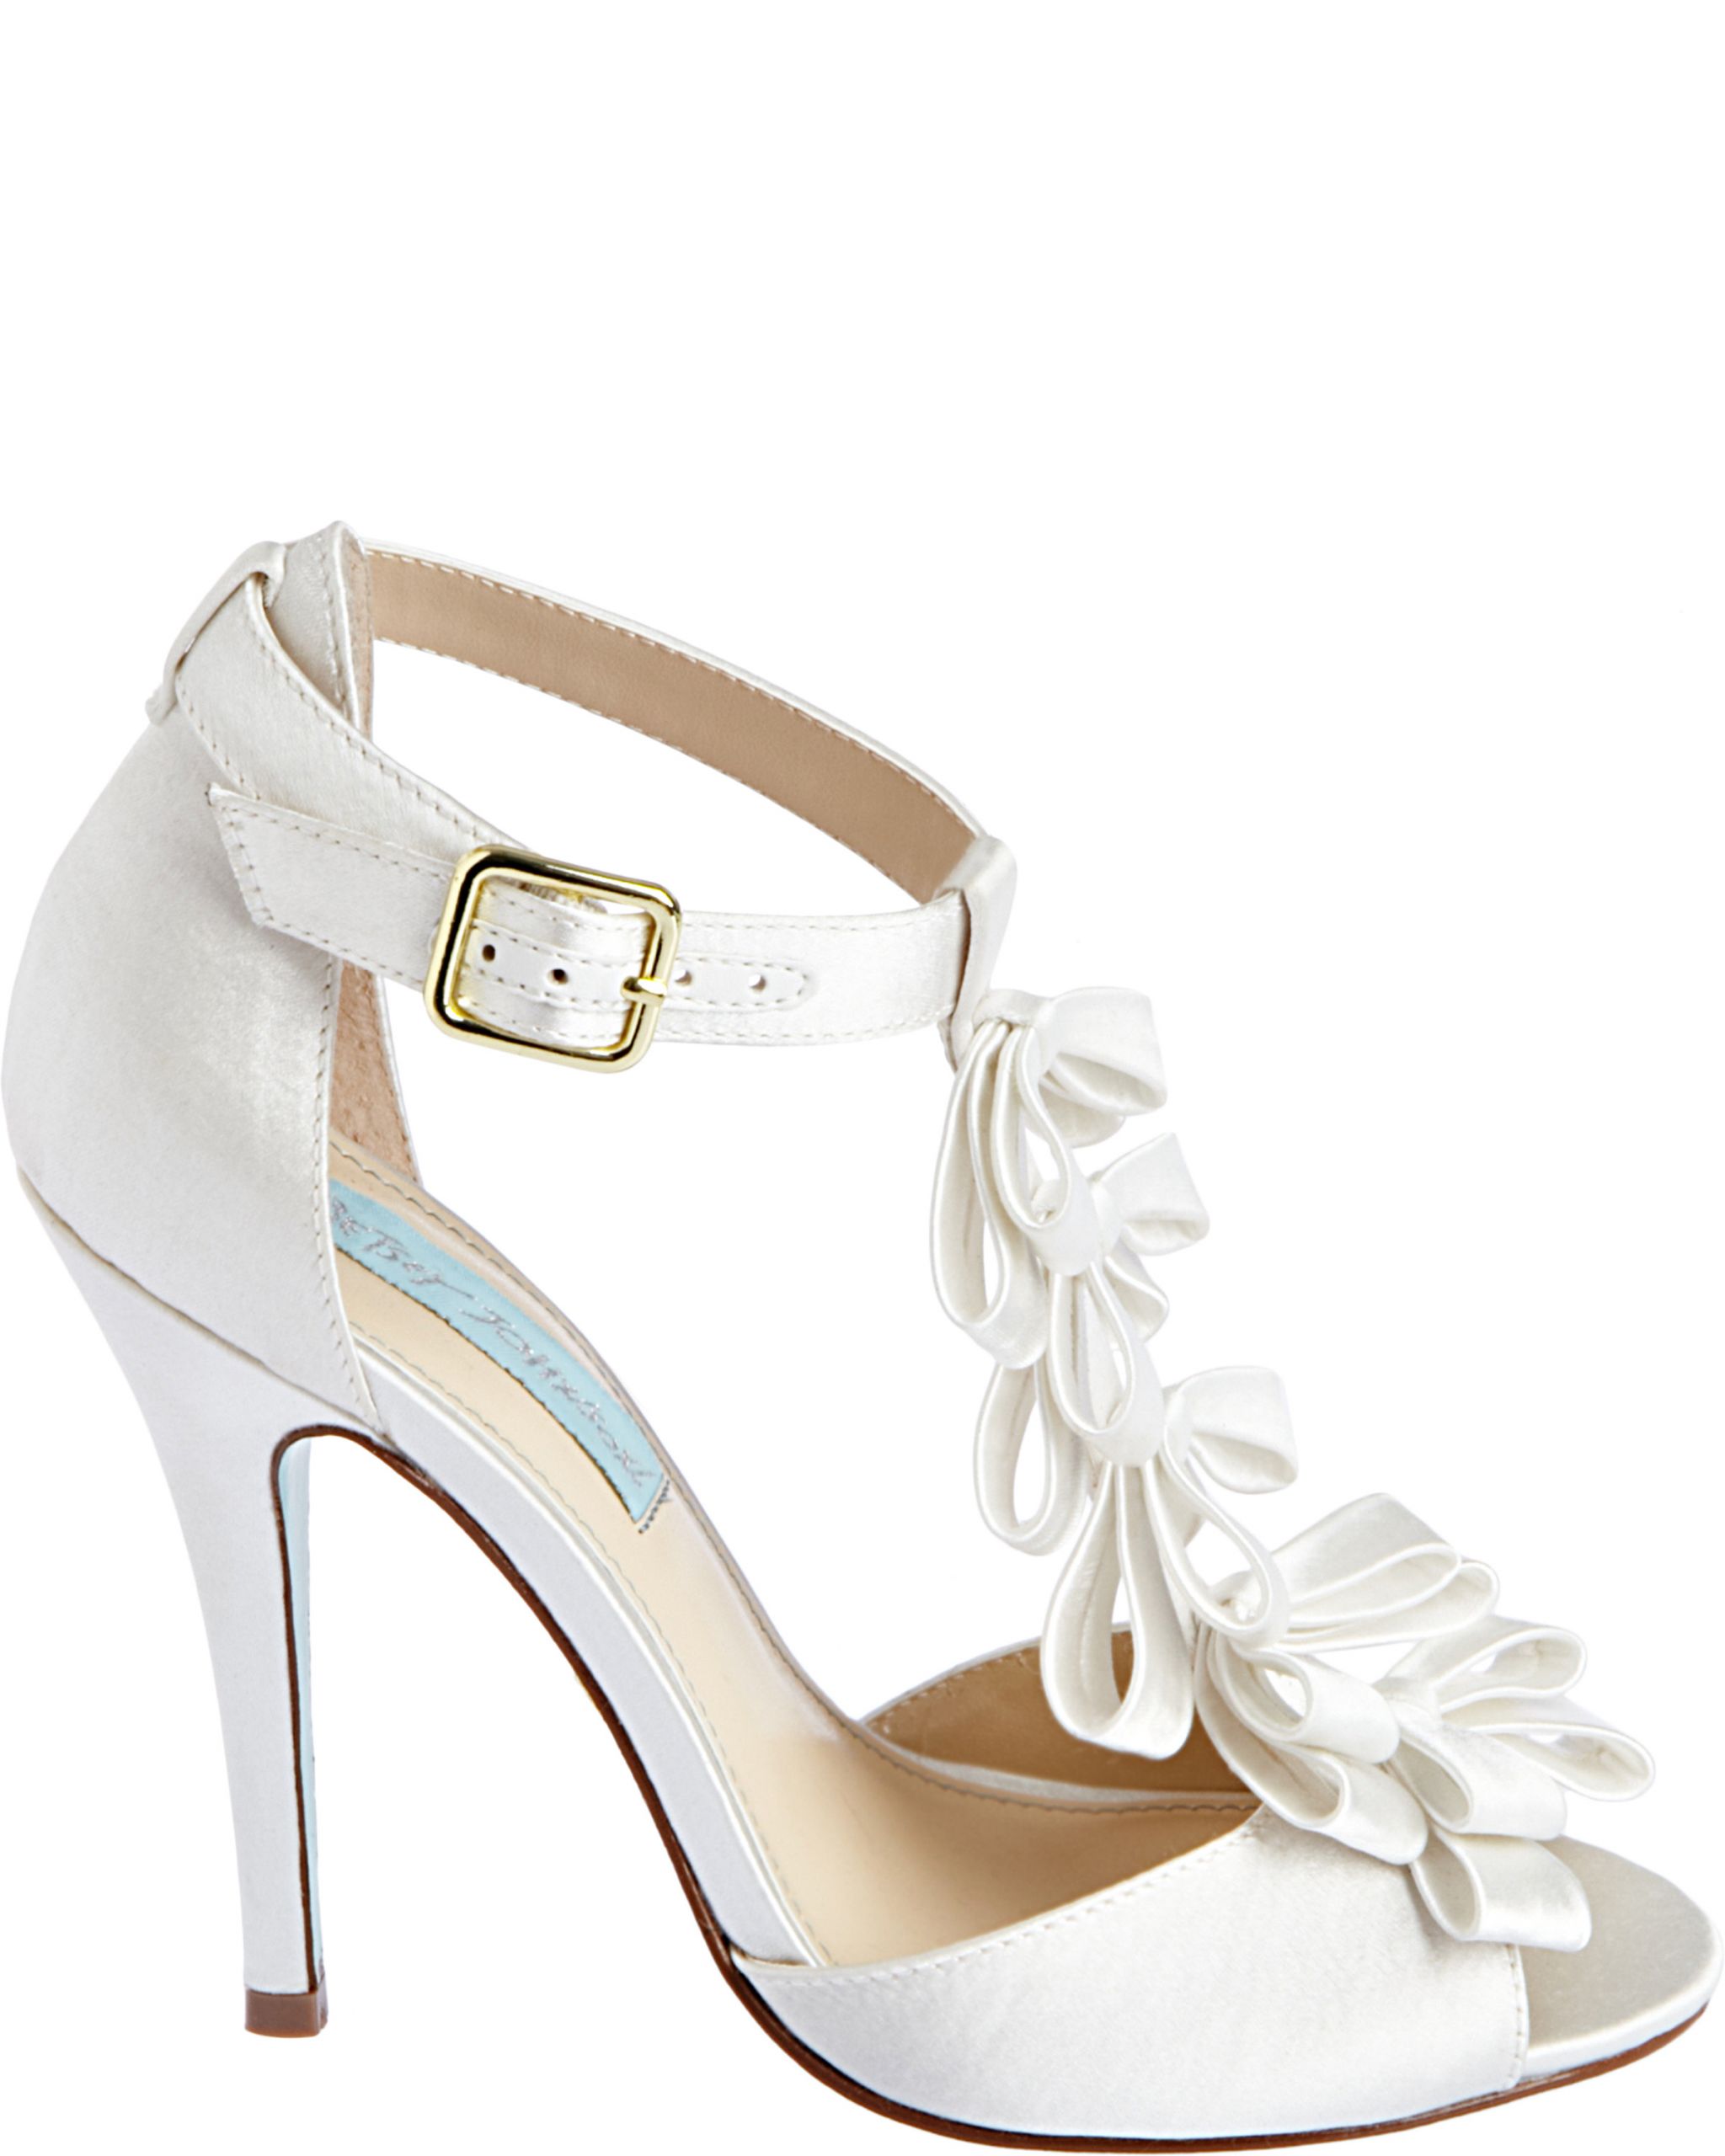 Betsey Johnson Blue Wedding Shoes
 Fab Find Betsey Johnson debuts her new BLUE by Betsey